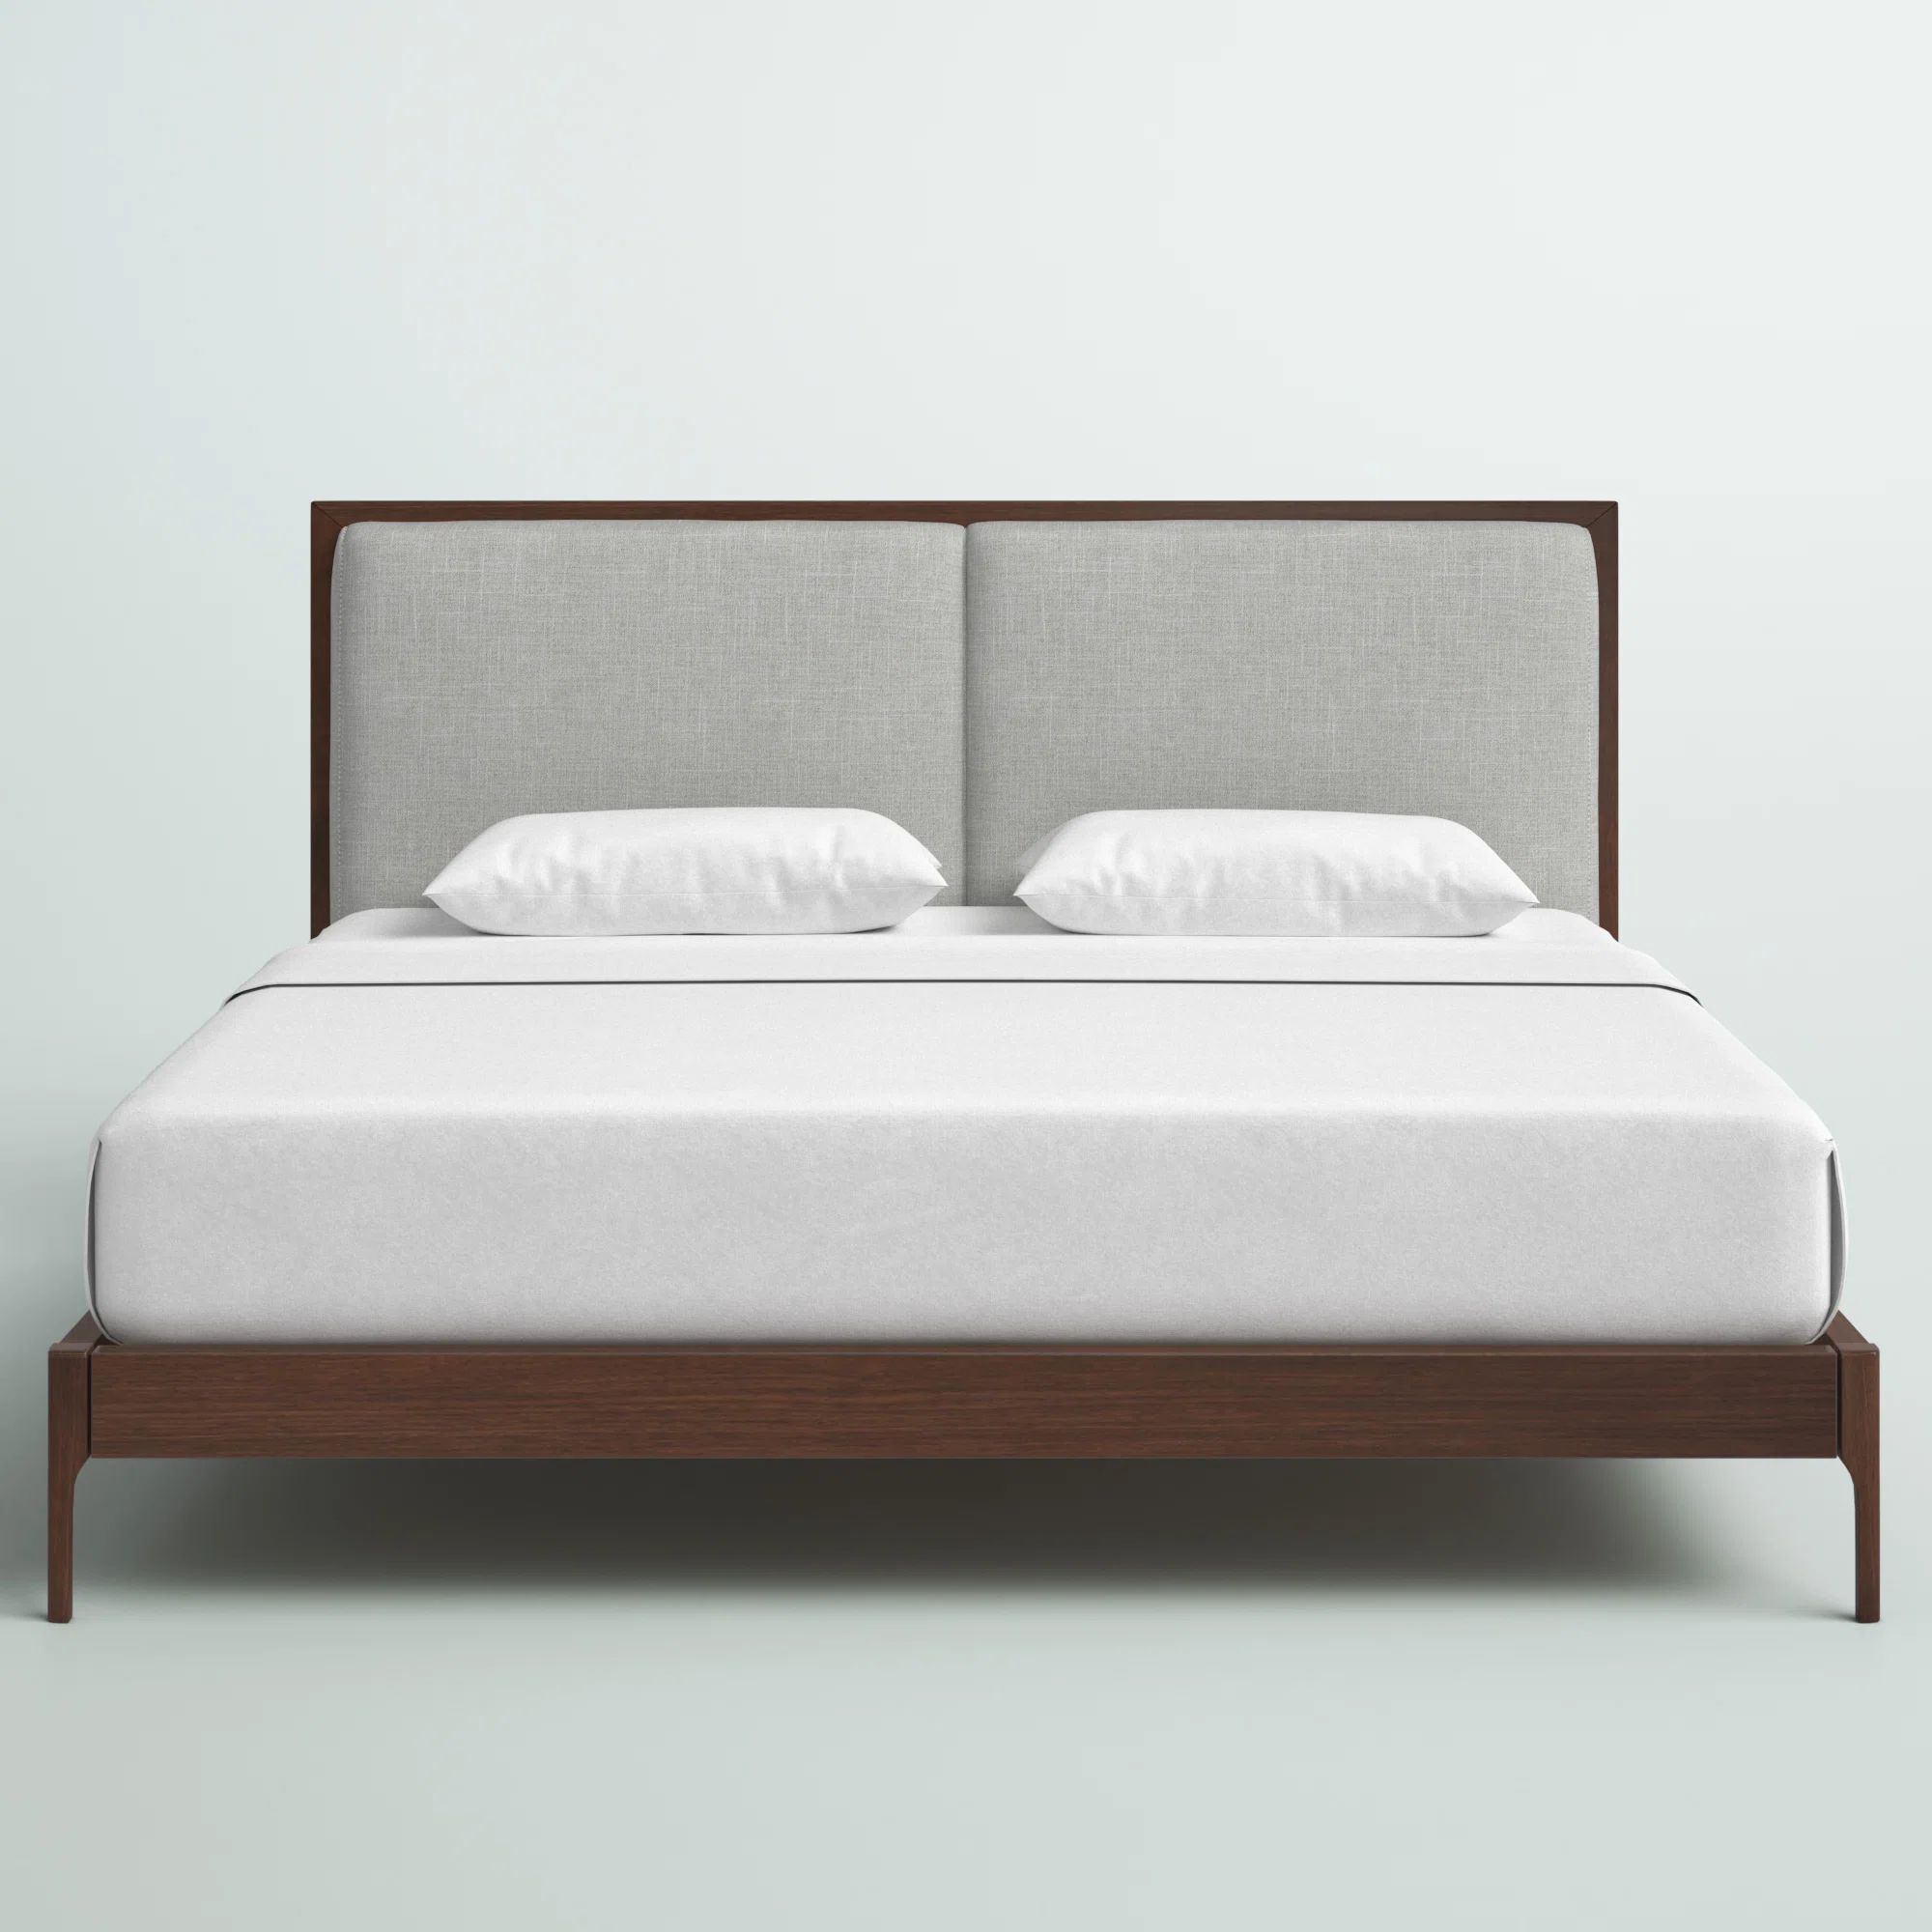 Bainville Upholstered Bed | Wayfair North America